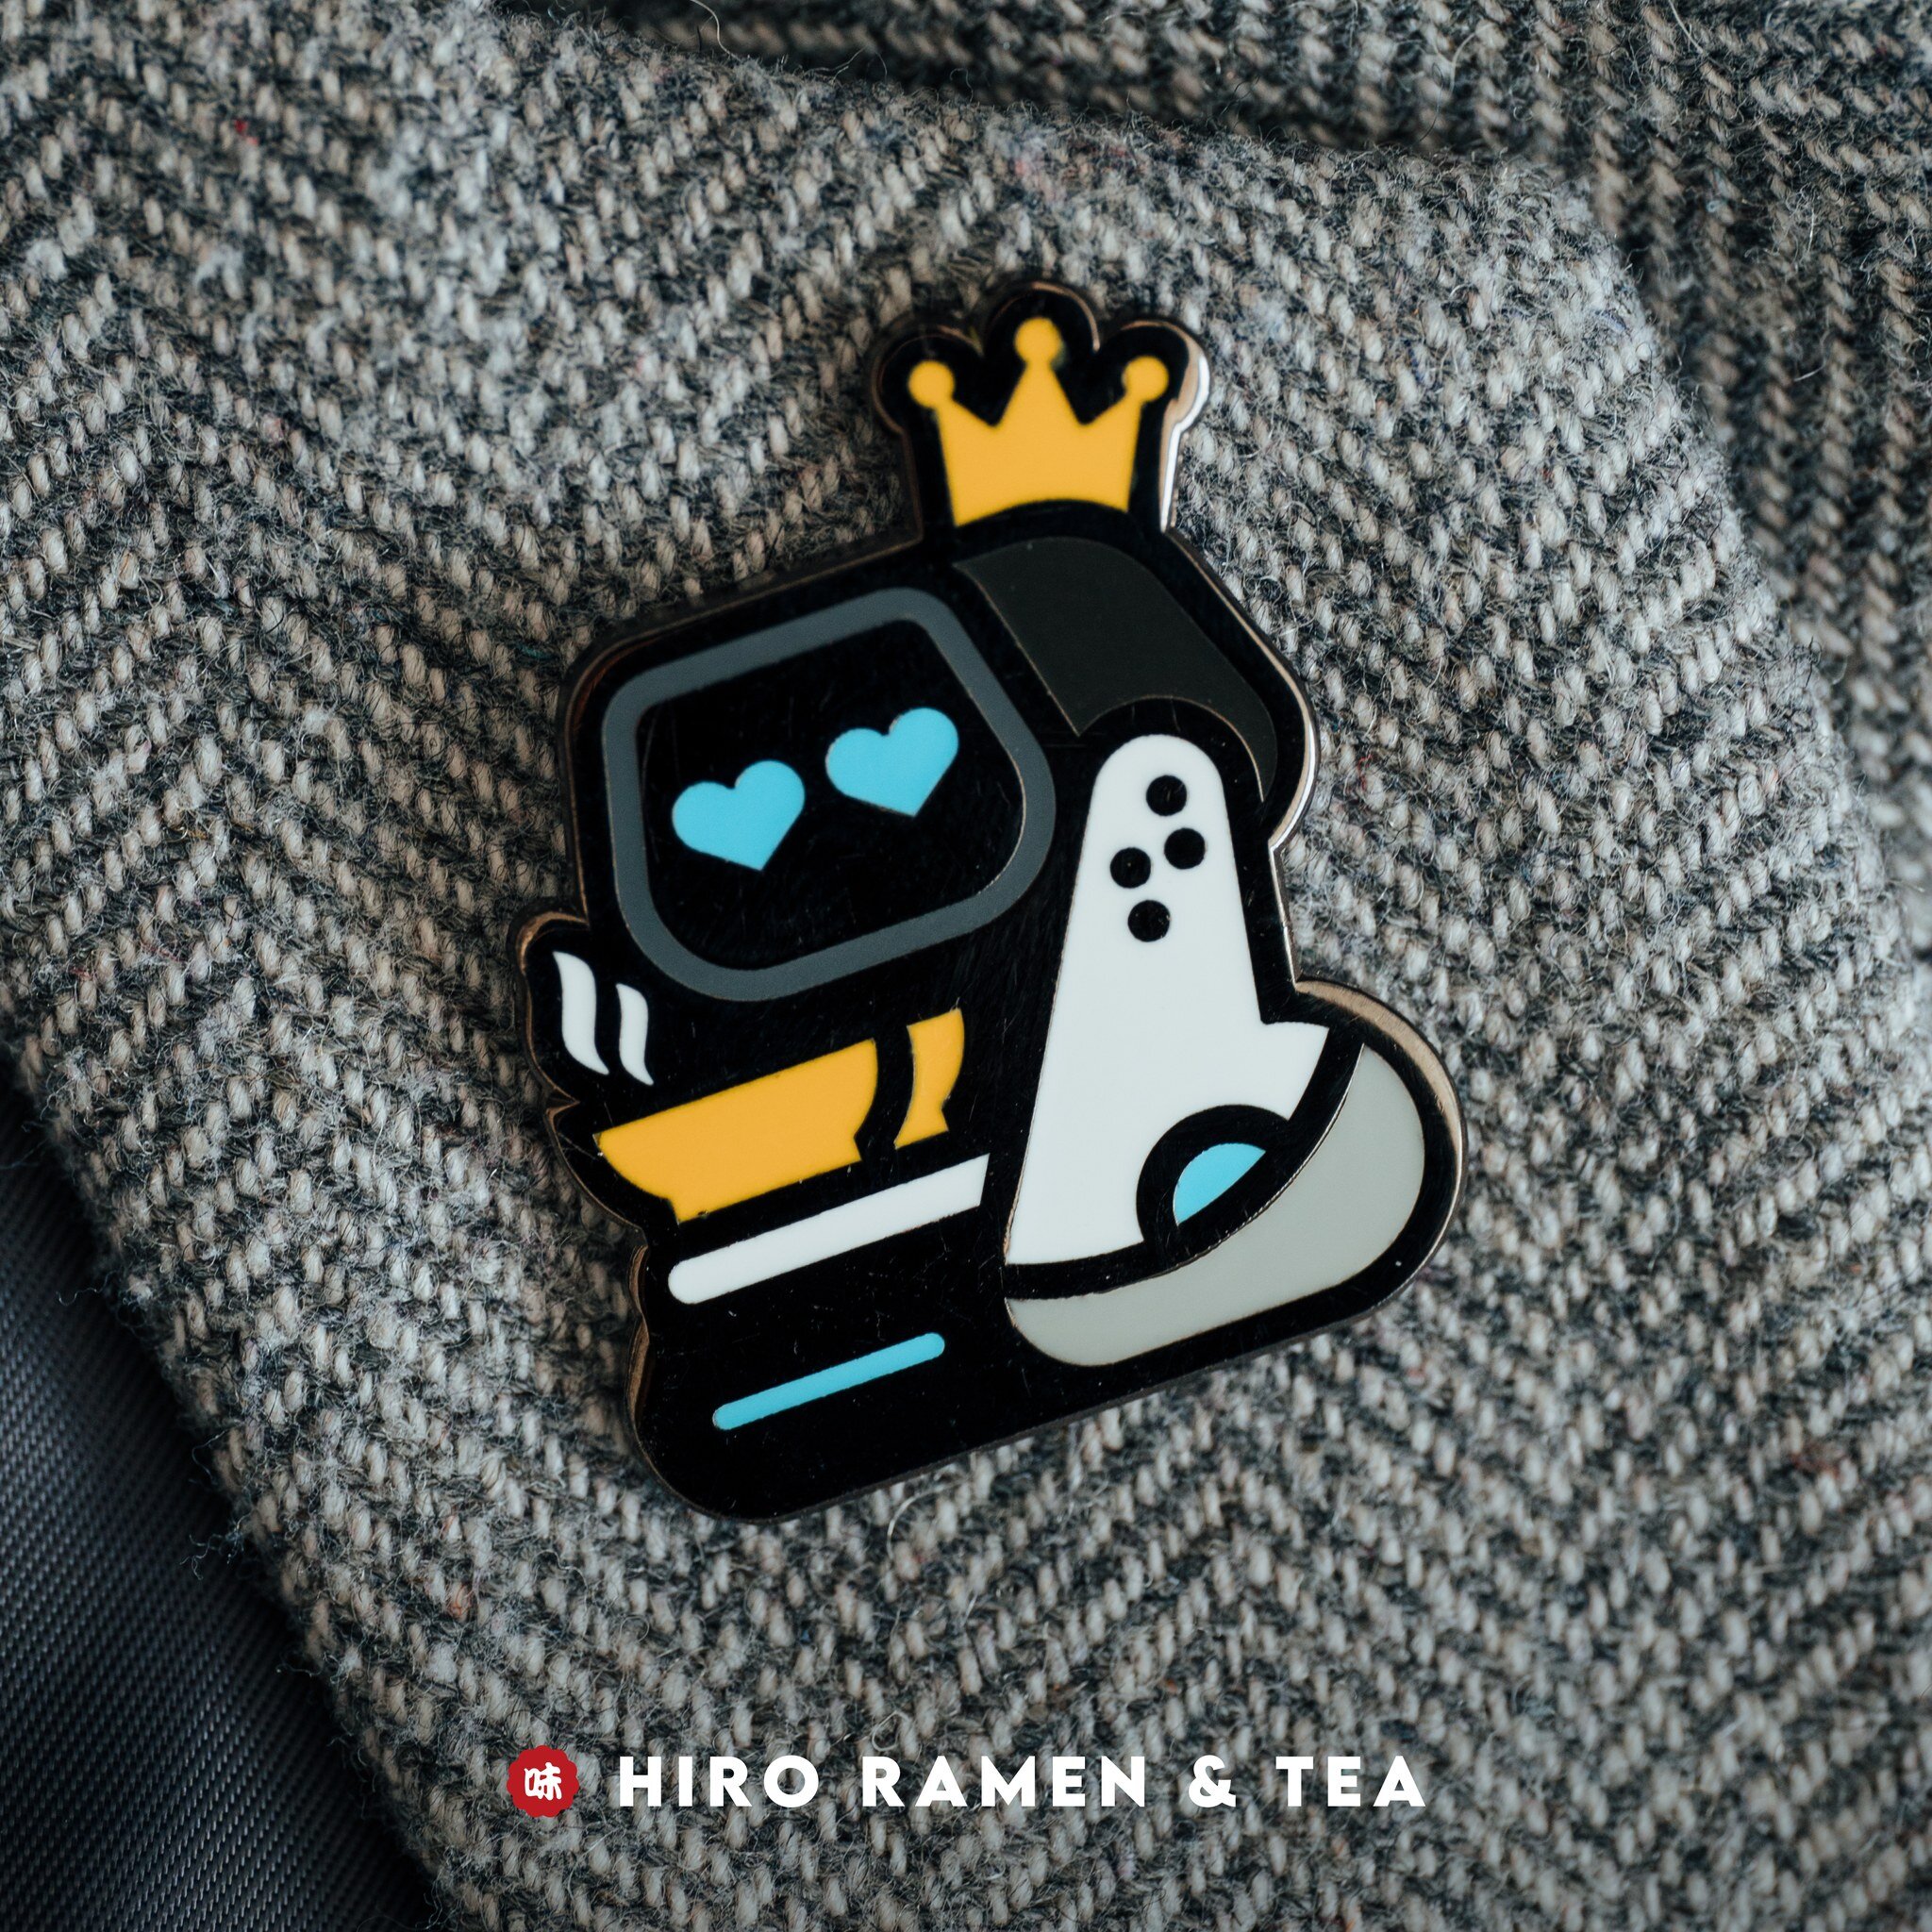 Our TARS hard enamel pin will be available in our merch shop at Hiro Ramen &amp; Tea starting tomorrow, stop by and pick one up! Have a warm rich bowl of ramen and refreshing tea while you're at it! Welcome to the weekend, everyone! 🙏🙏🙏.

#columbu